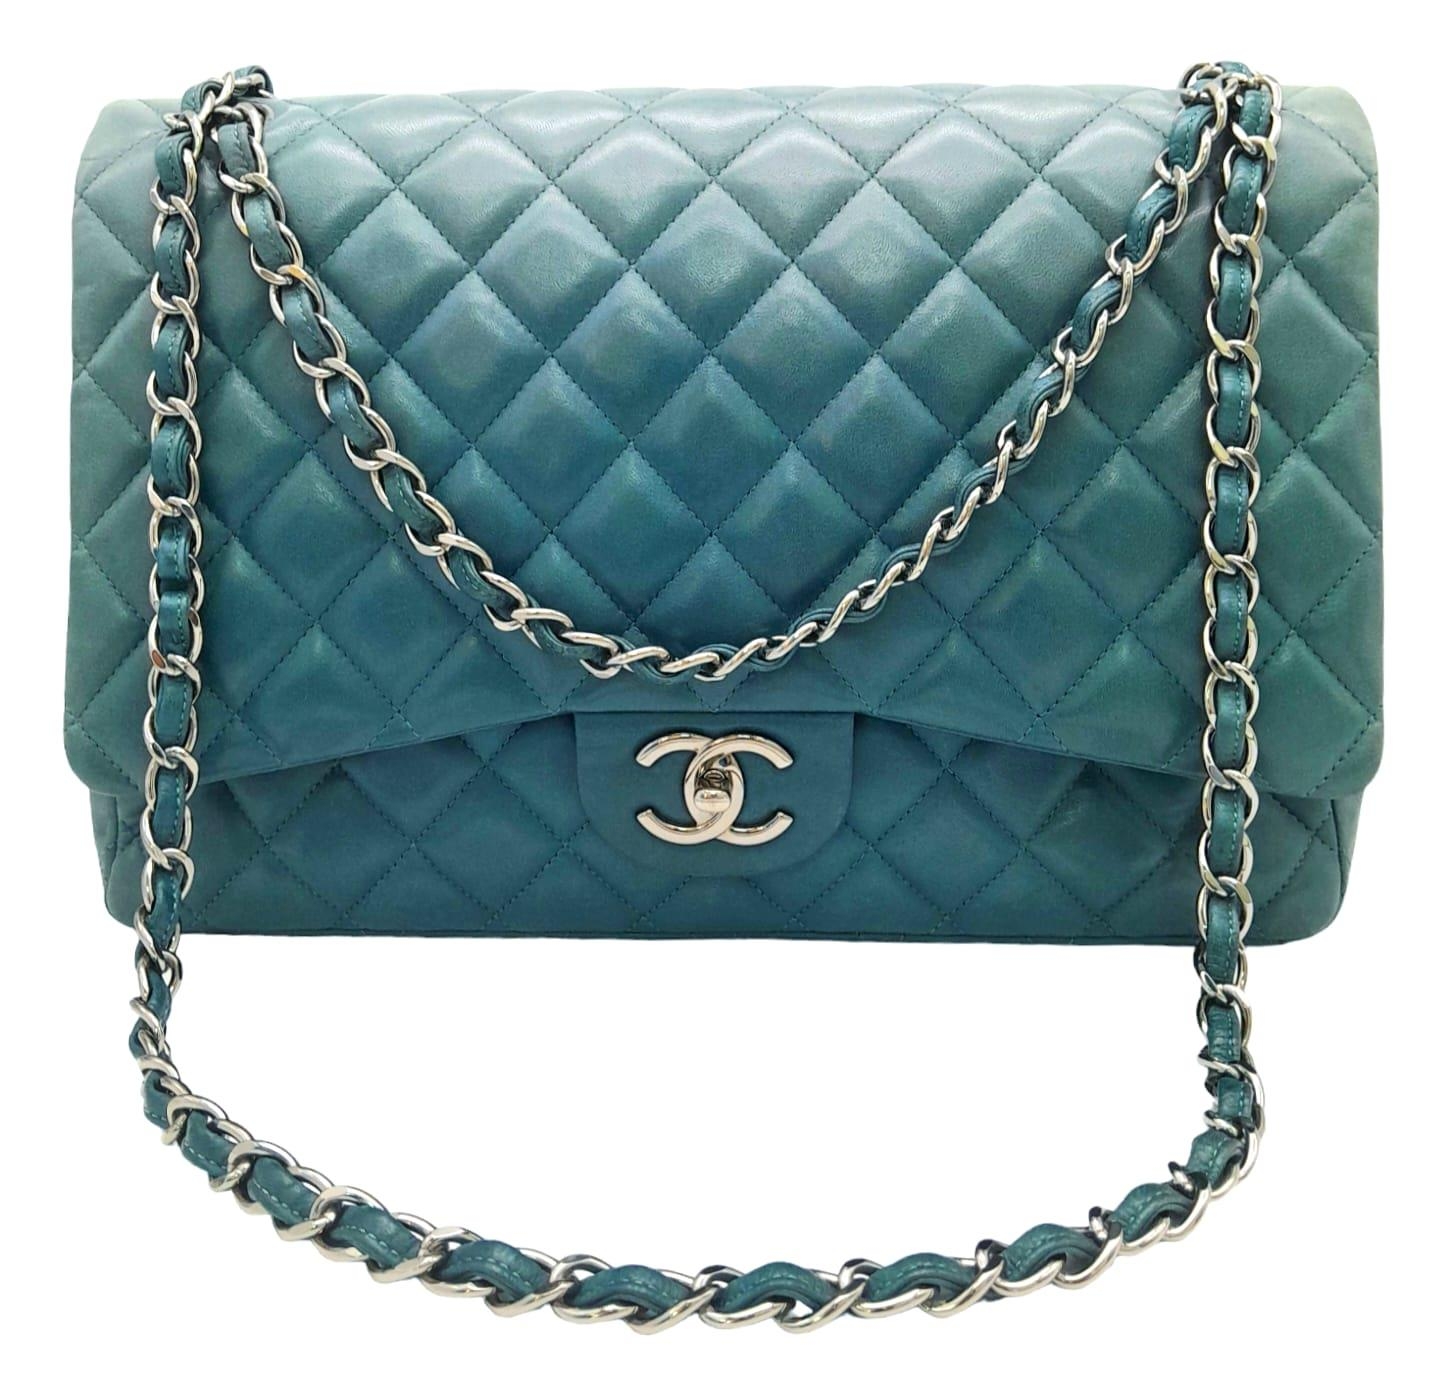 A Chanel Teal Jumbo Classic Double Flap Bag. Quilted leather exterior with silver-toned hardware,